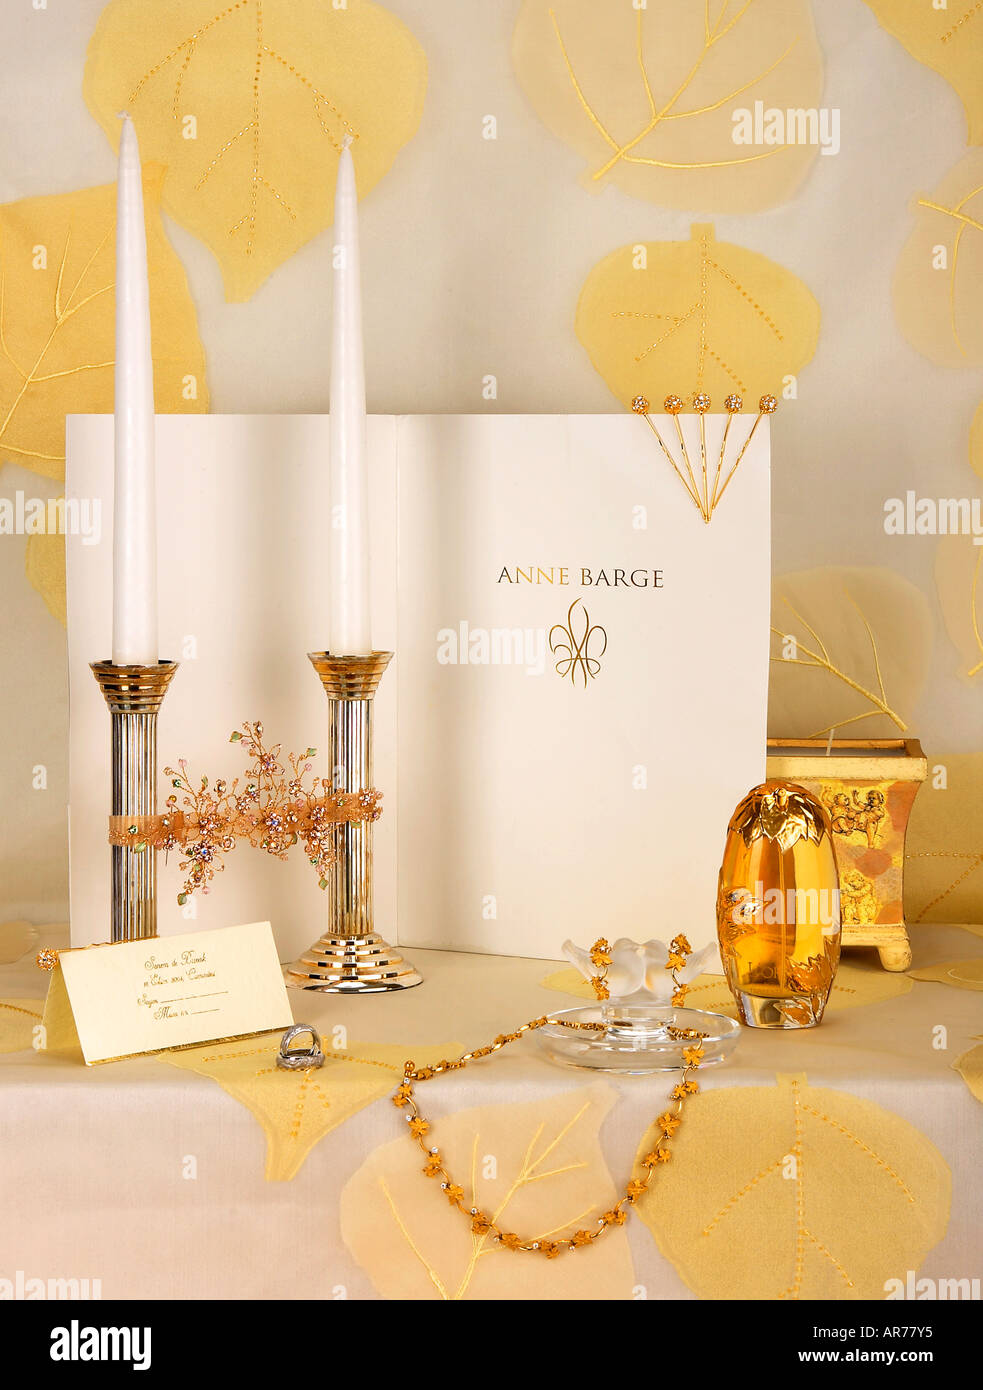 general view of some items assocaiated with a wedding including an invitation, candlestick and jewelley. Stock Photo